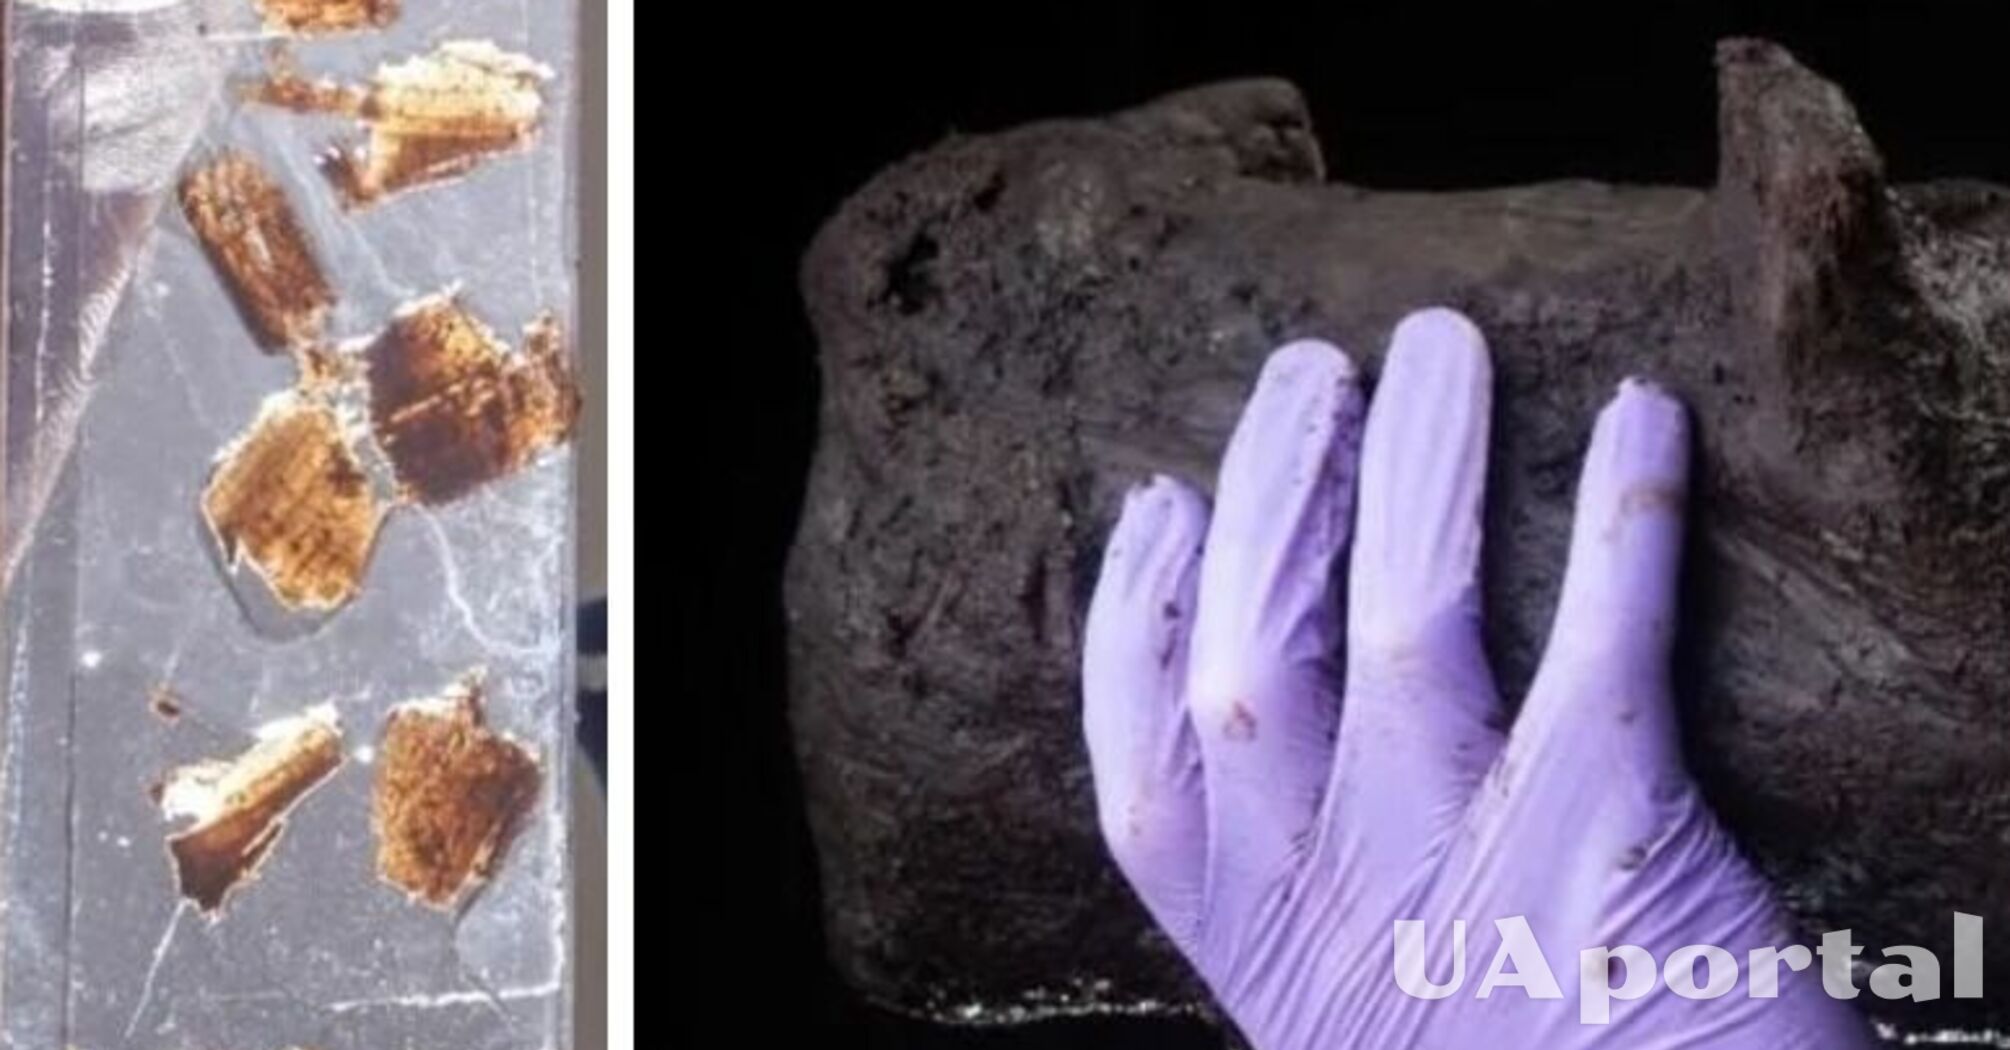 In England, archaeologists have discovered a prehistoric 'time capsule' (photo)